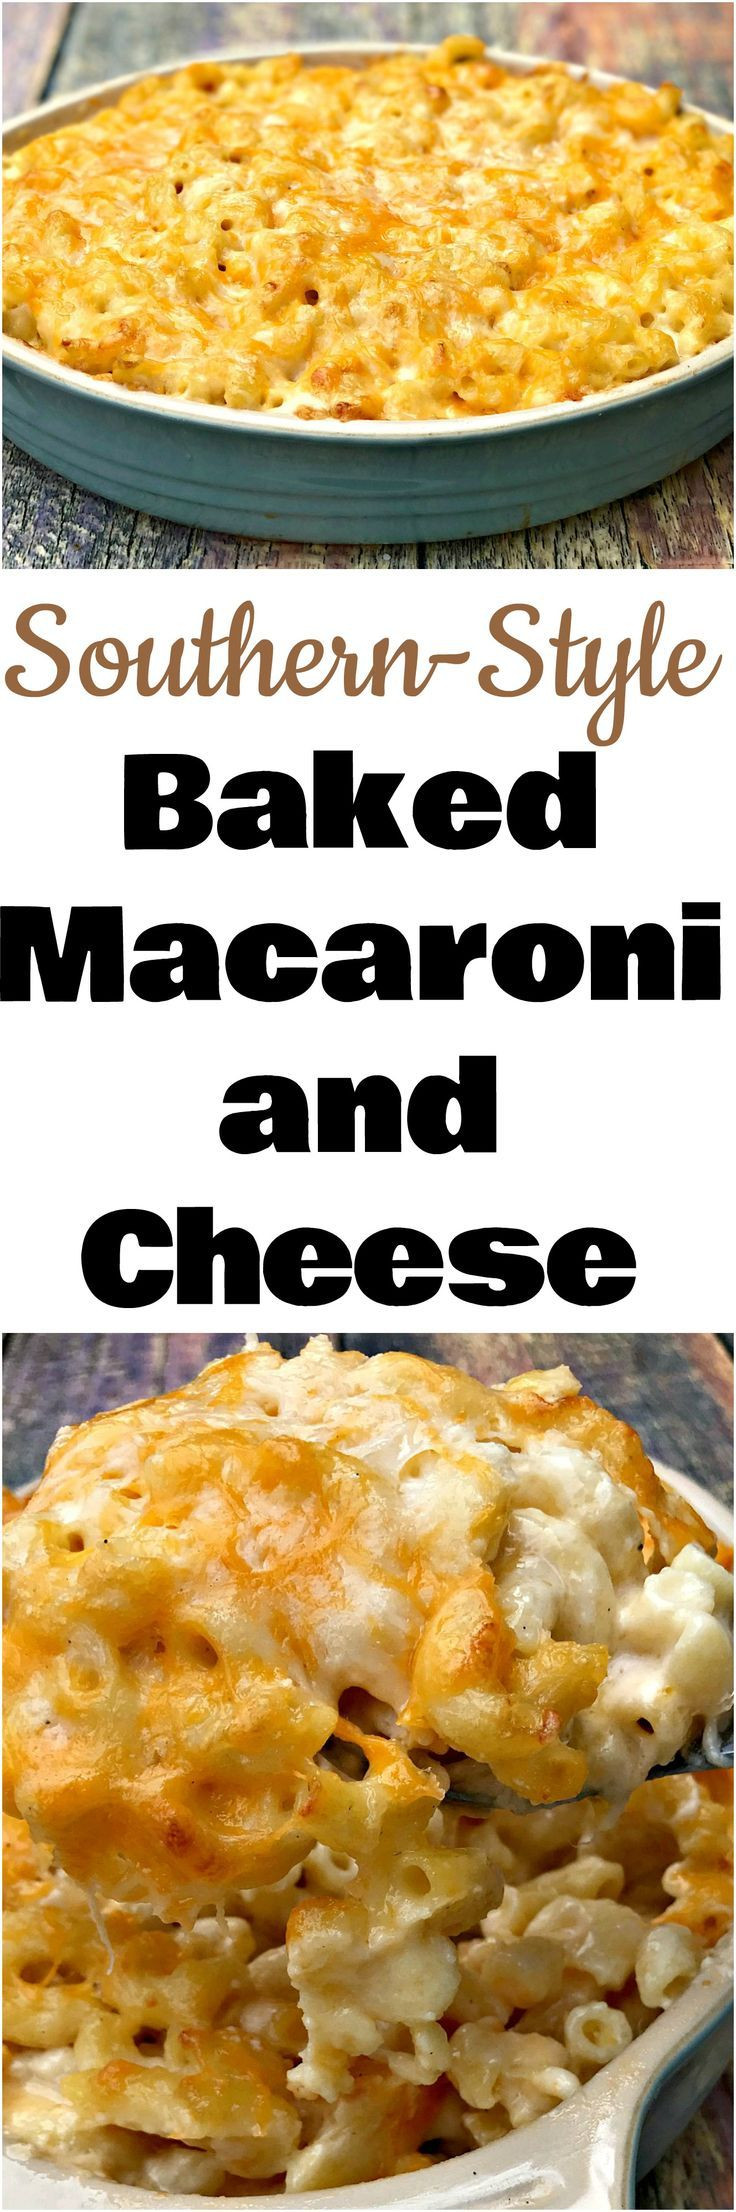 Recipe For Baked Macaroni And Cheese Soul Food
 Southern Style Baked Macaroni and Cheese is a homemade